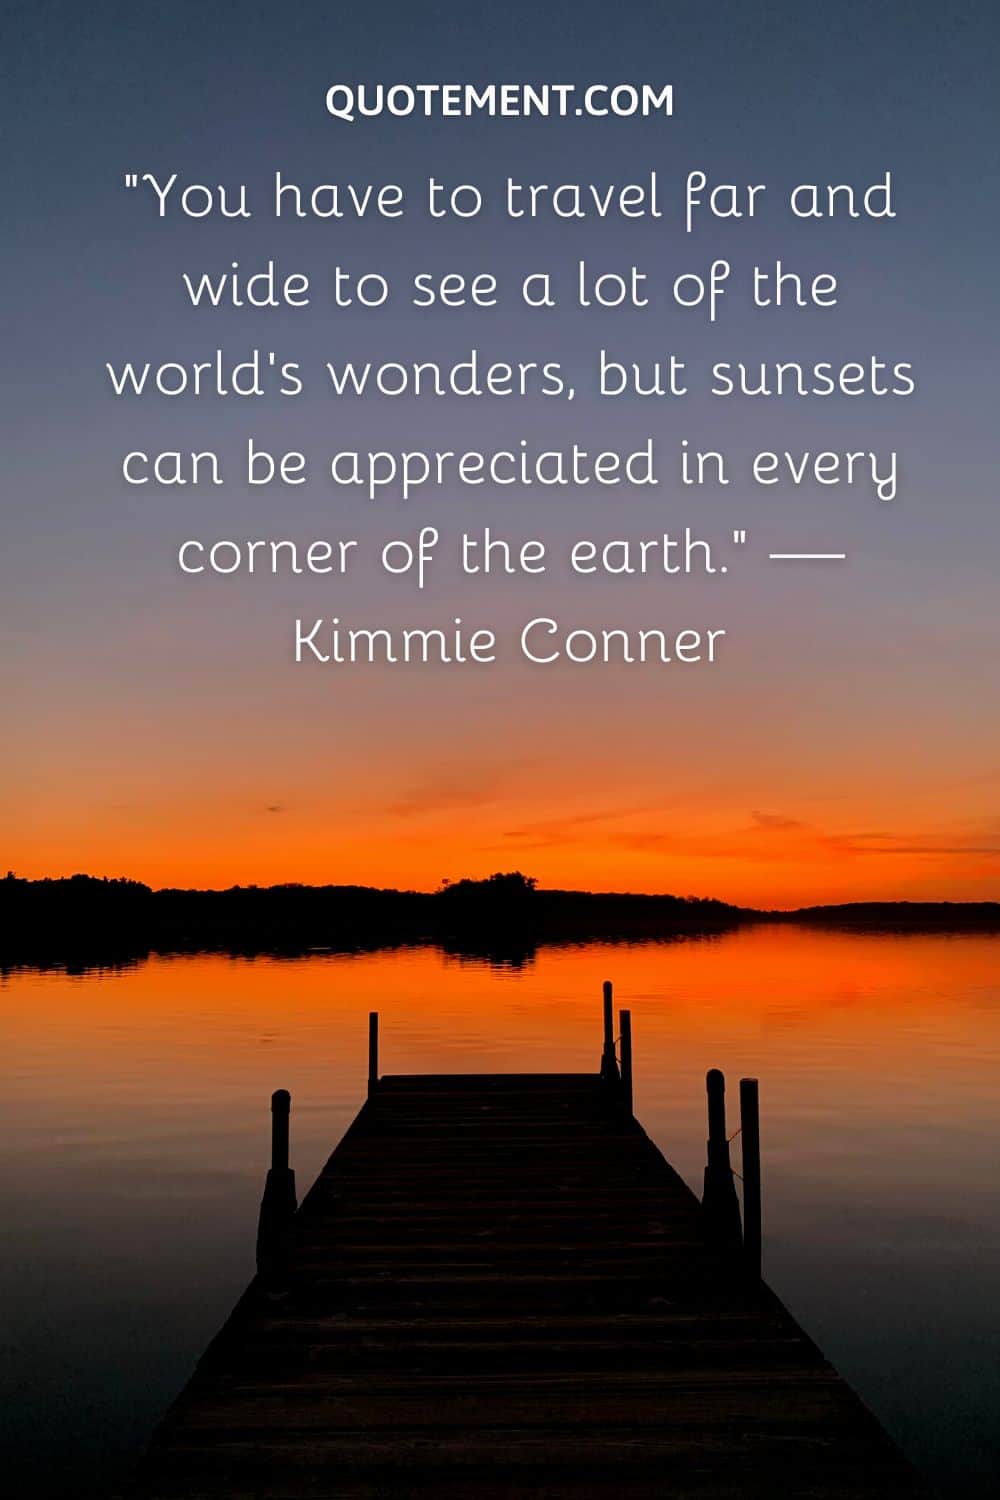 “You have to travel far and wide to see a lot of the world’s wonders, but sunsets can be appreciated in every corner of the earth.” — Kimmie Conner